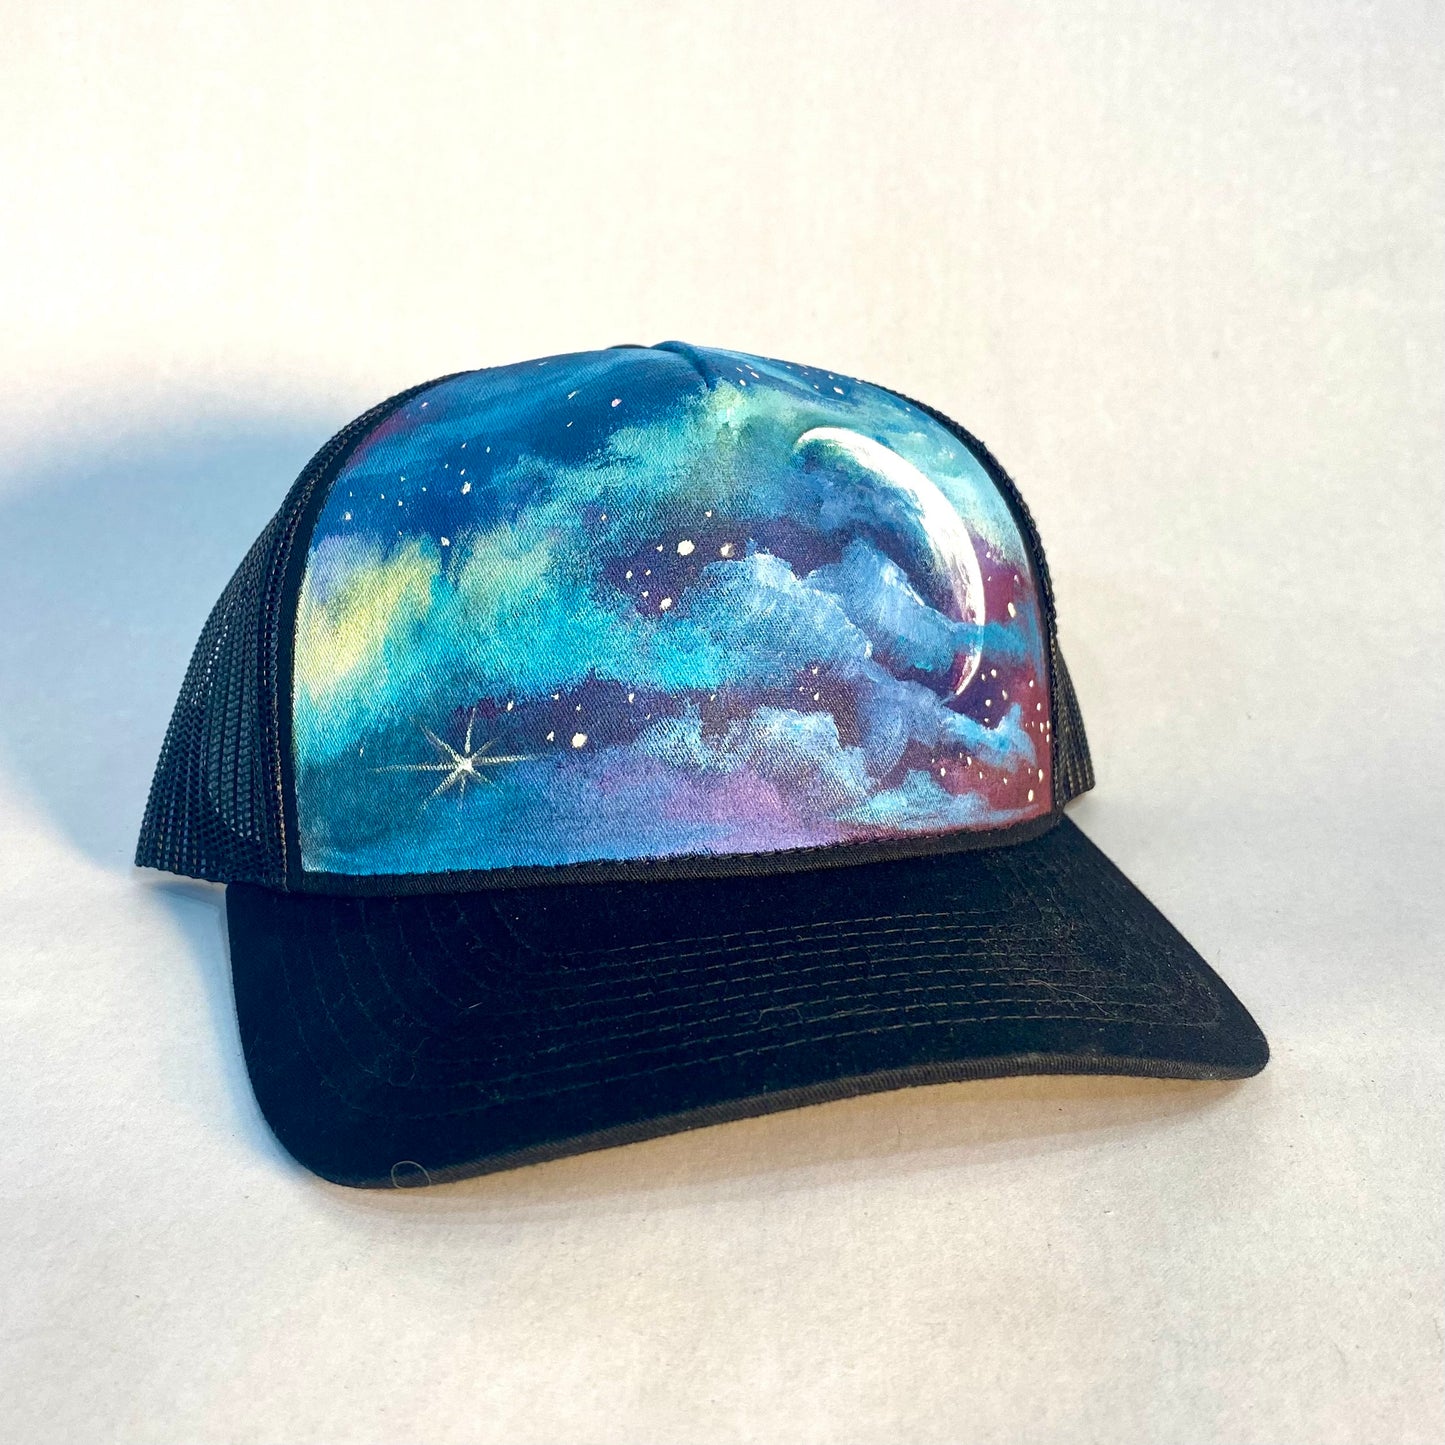 "Glow in the Dark Crescent Moon" Hand Painted Hat